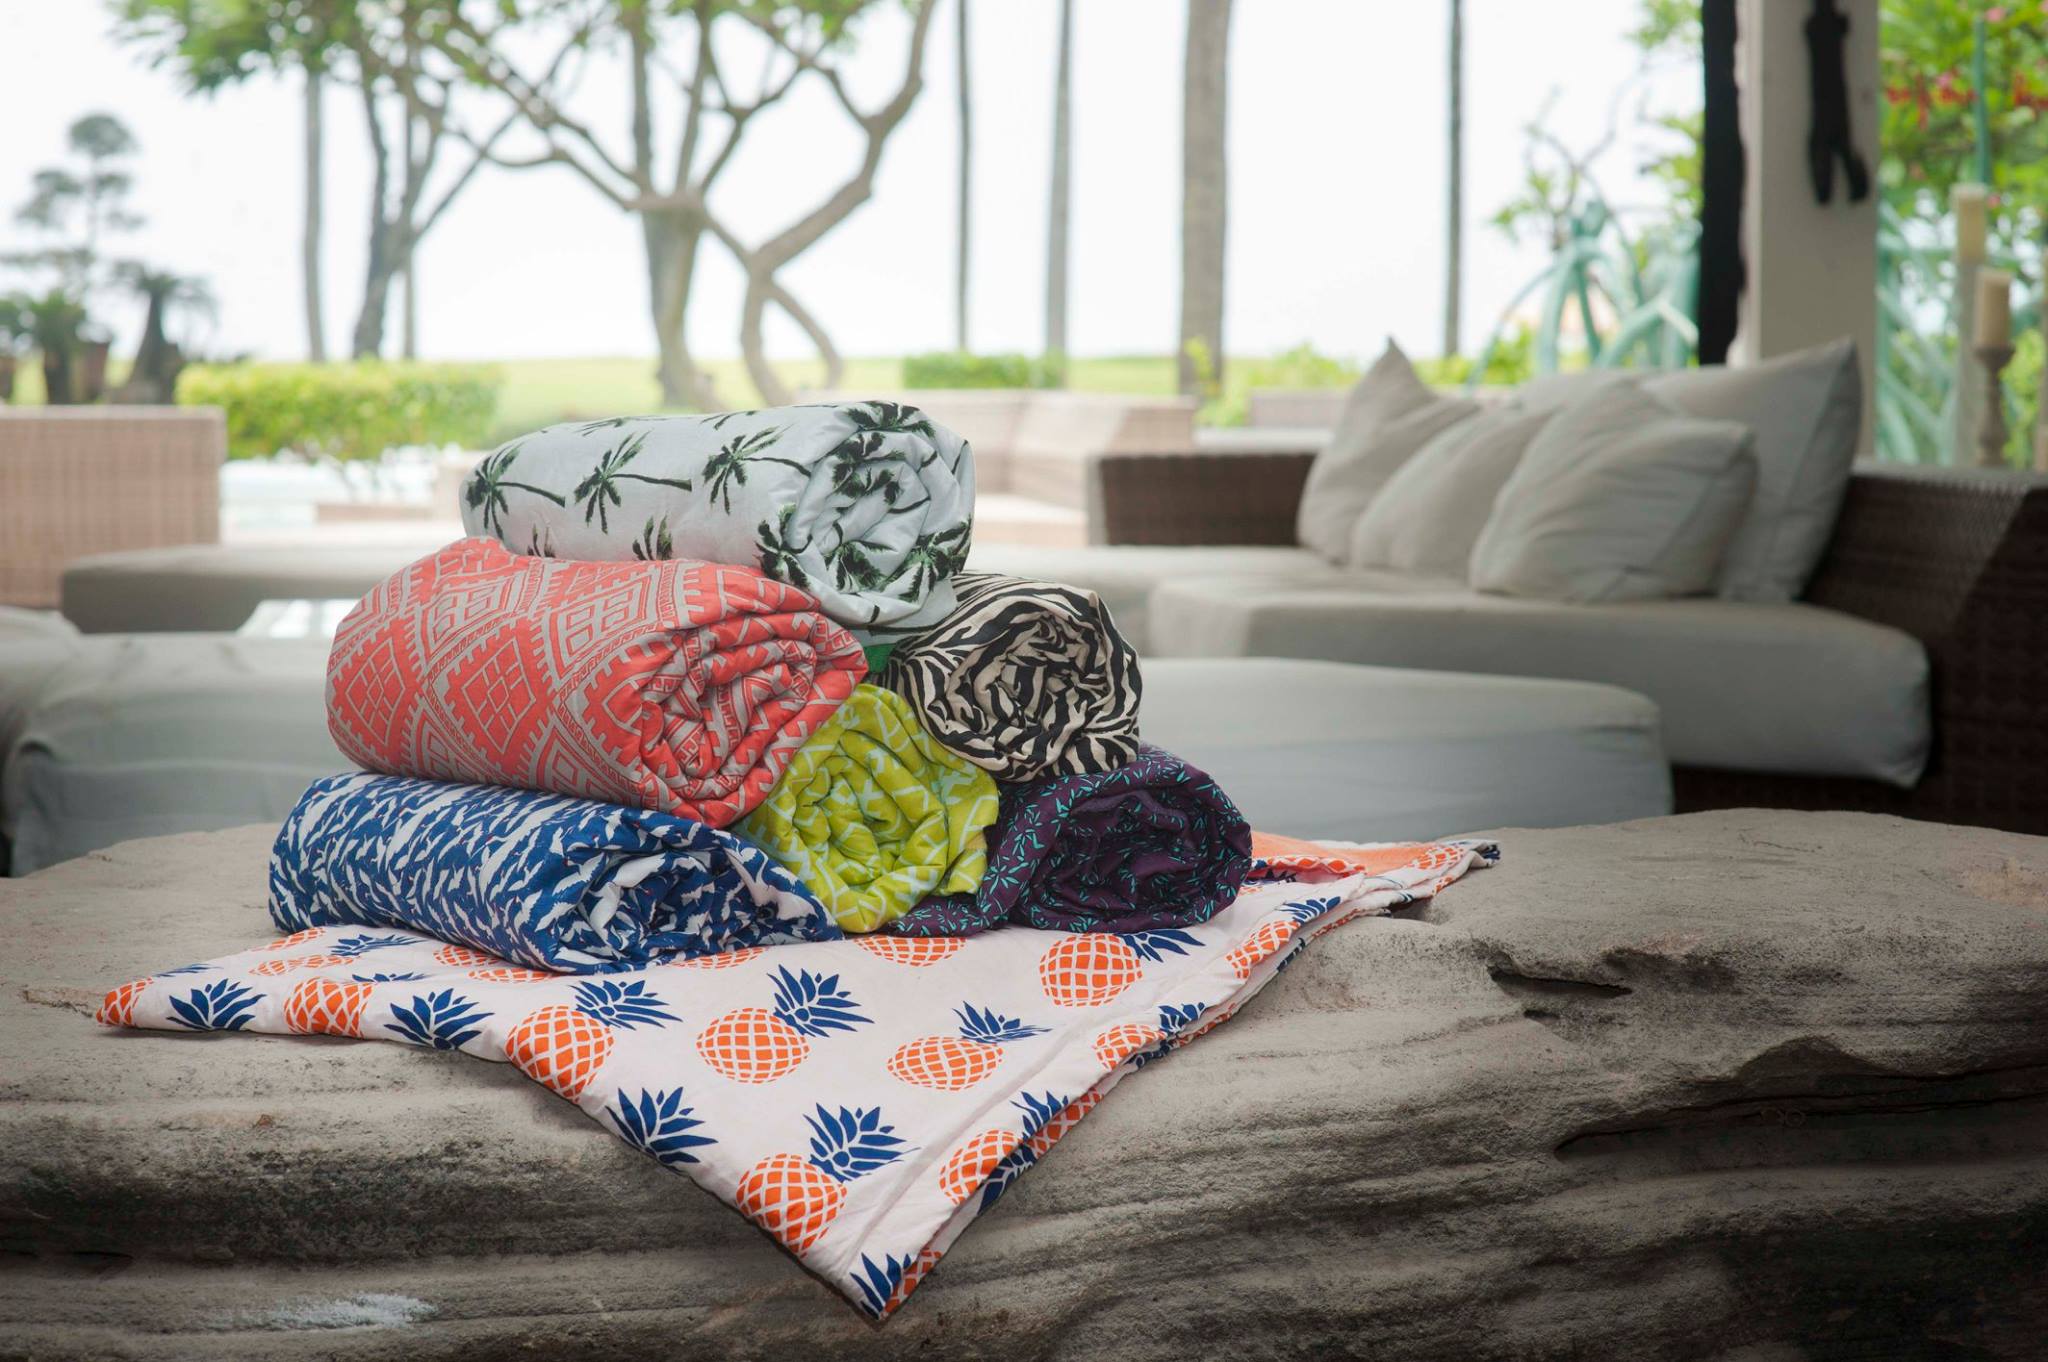 Inspired by Batik traditions and the Balinese sarong, each one of these towels is seriously a lovingly-made work of art. How on earth do we choose? 